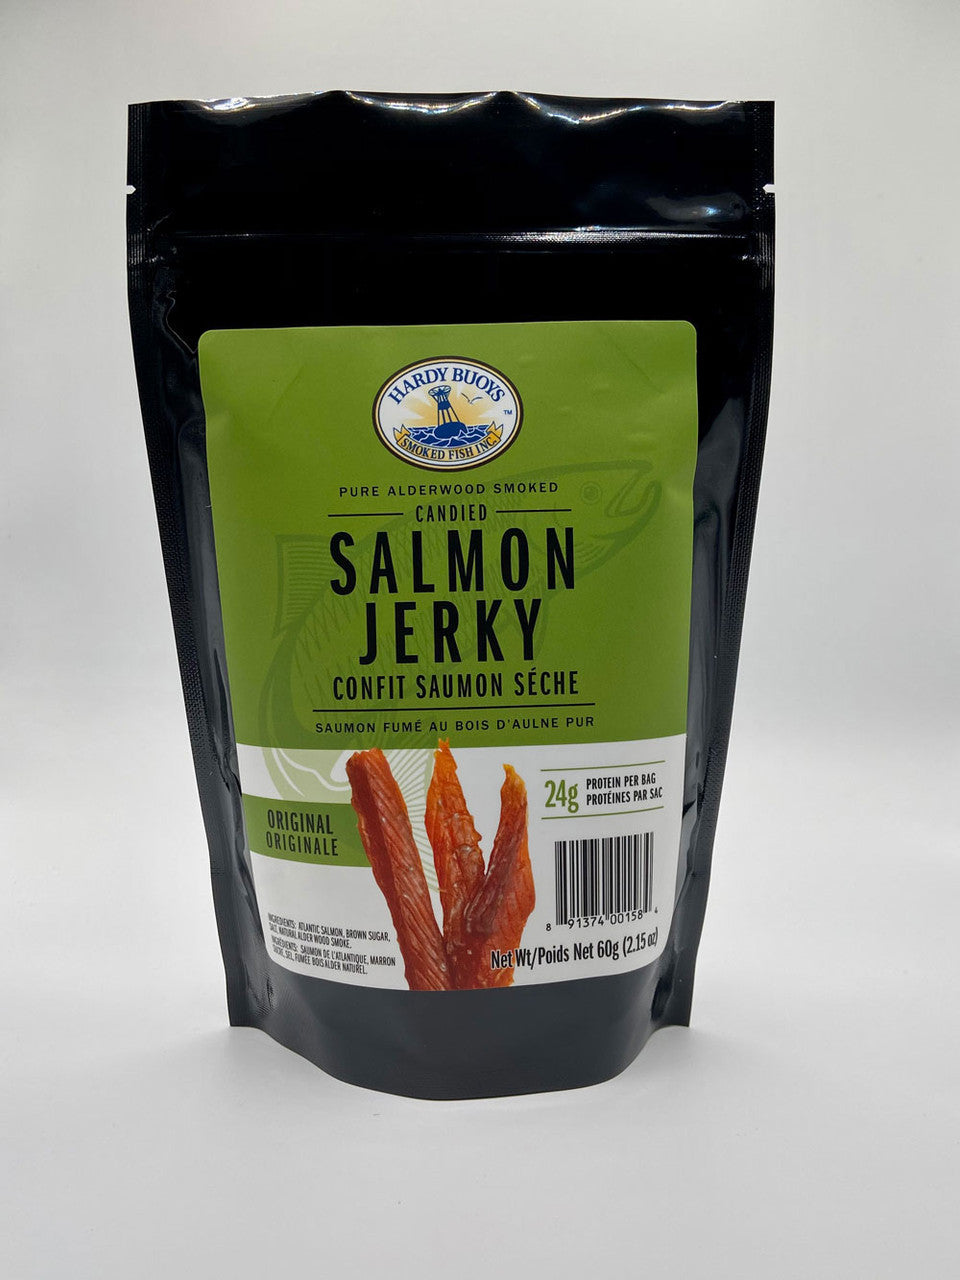 20 Pack Original Candied Salmon-Jerky